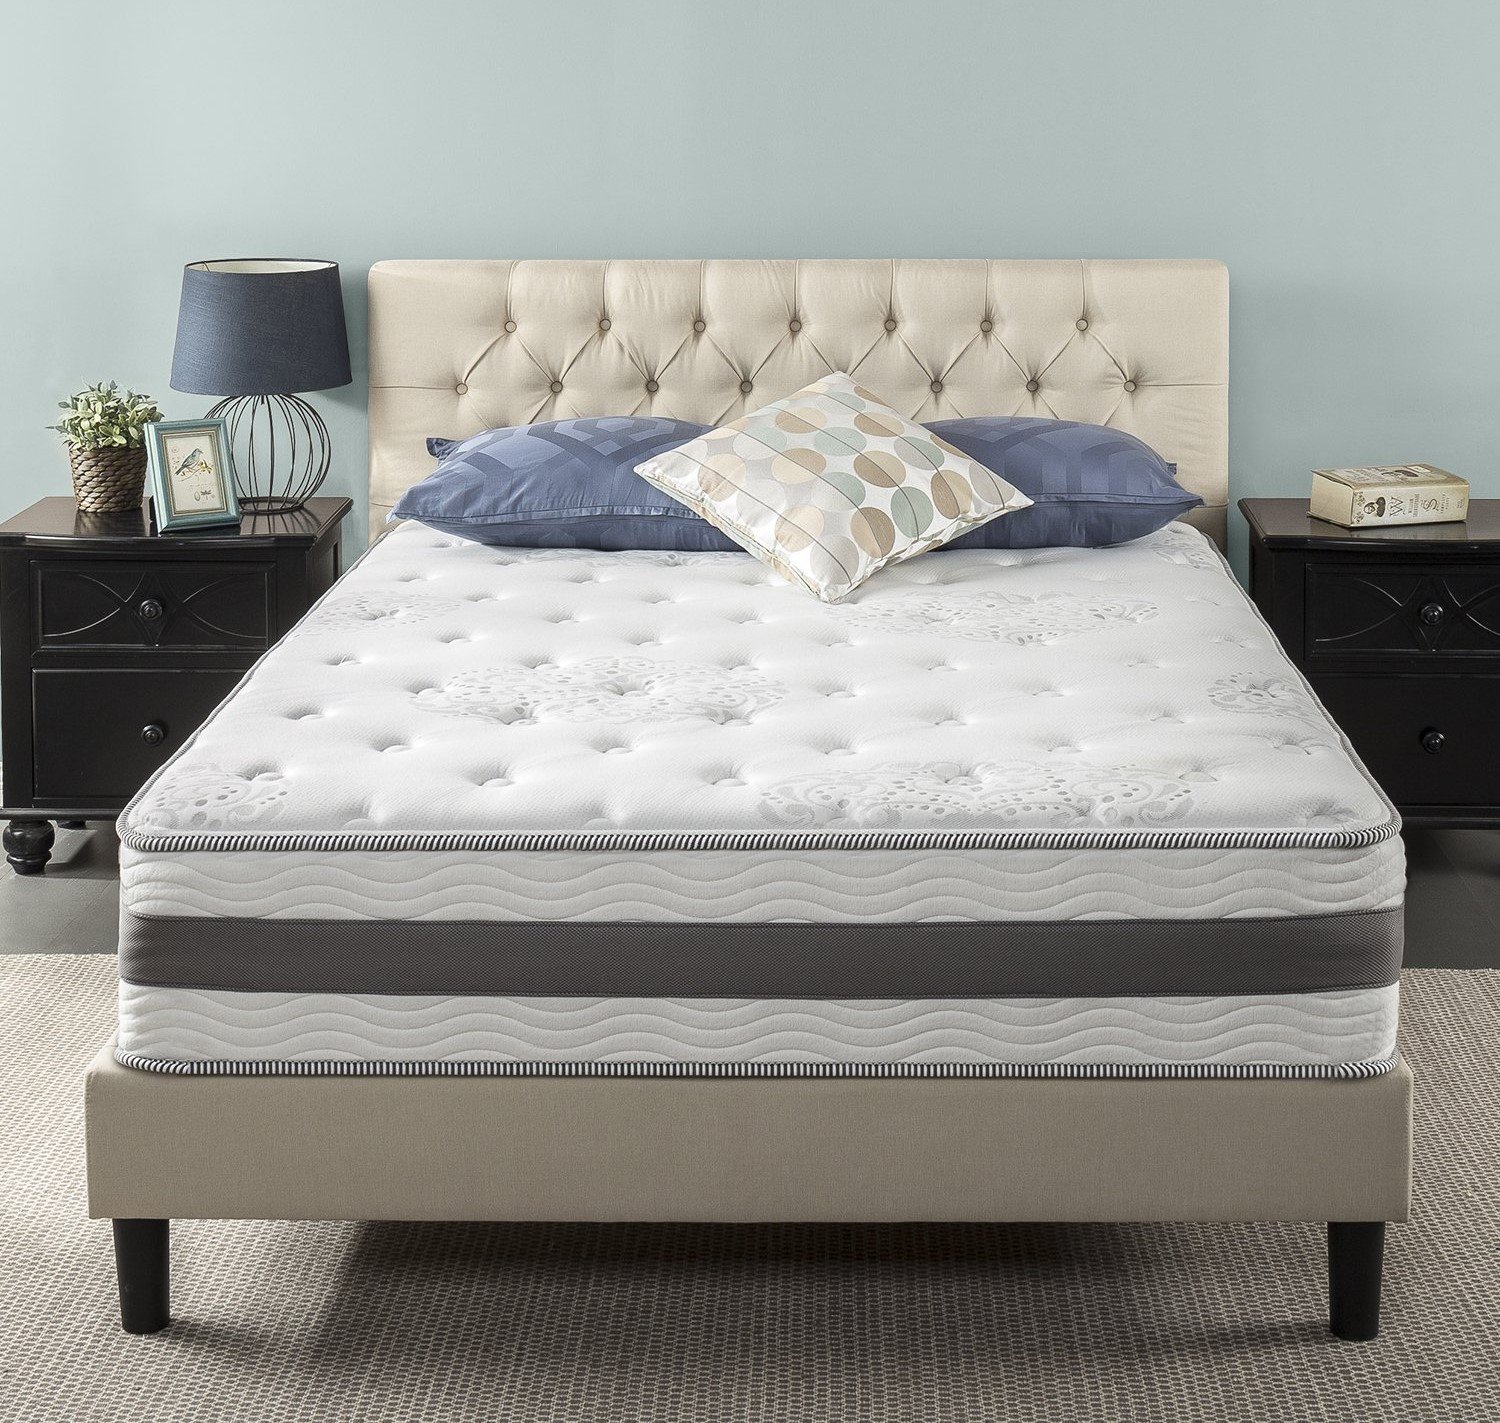 9 Tips For Buying a New Mattress In 2020